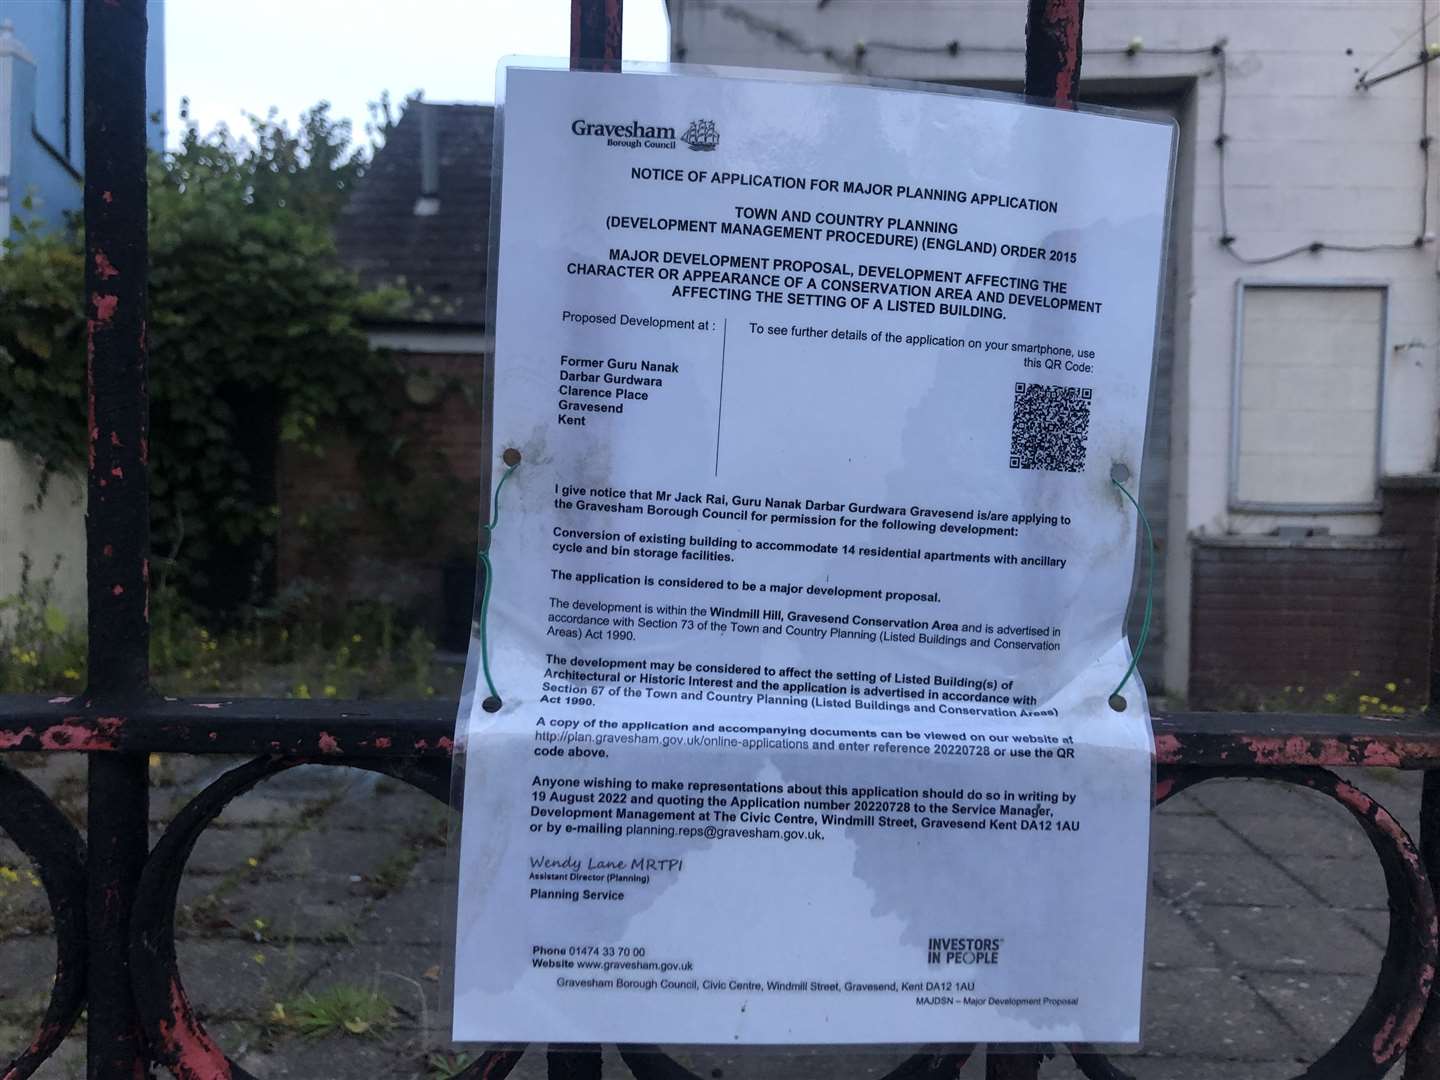 Planning notice to convert the building into 14 flats